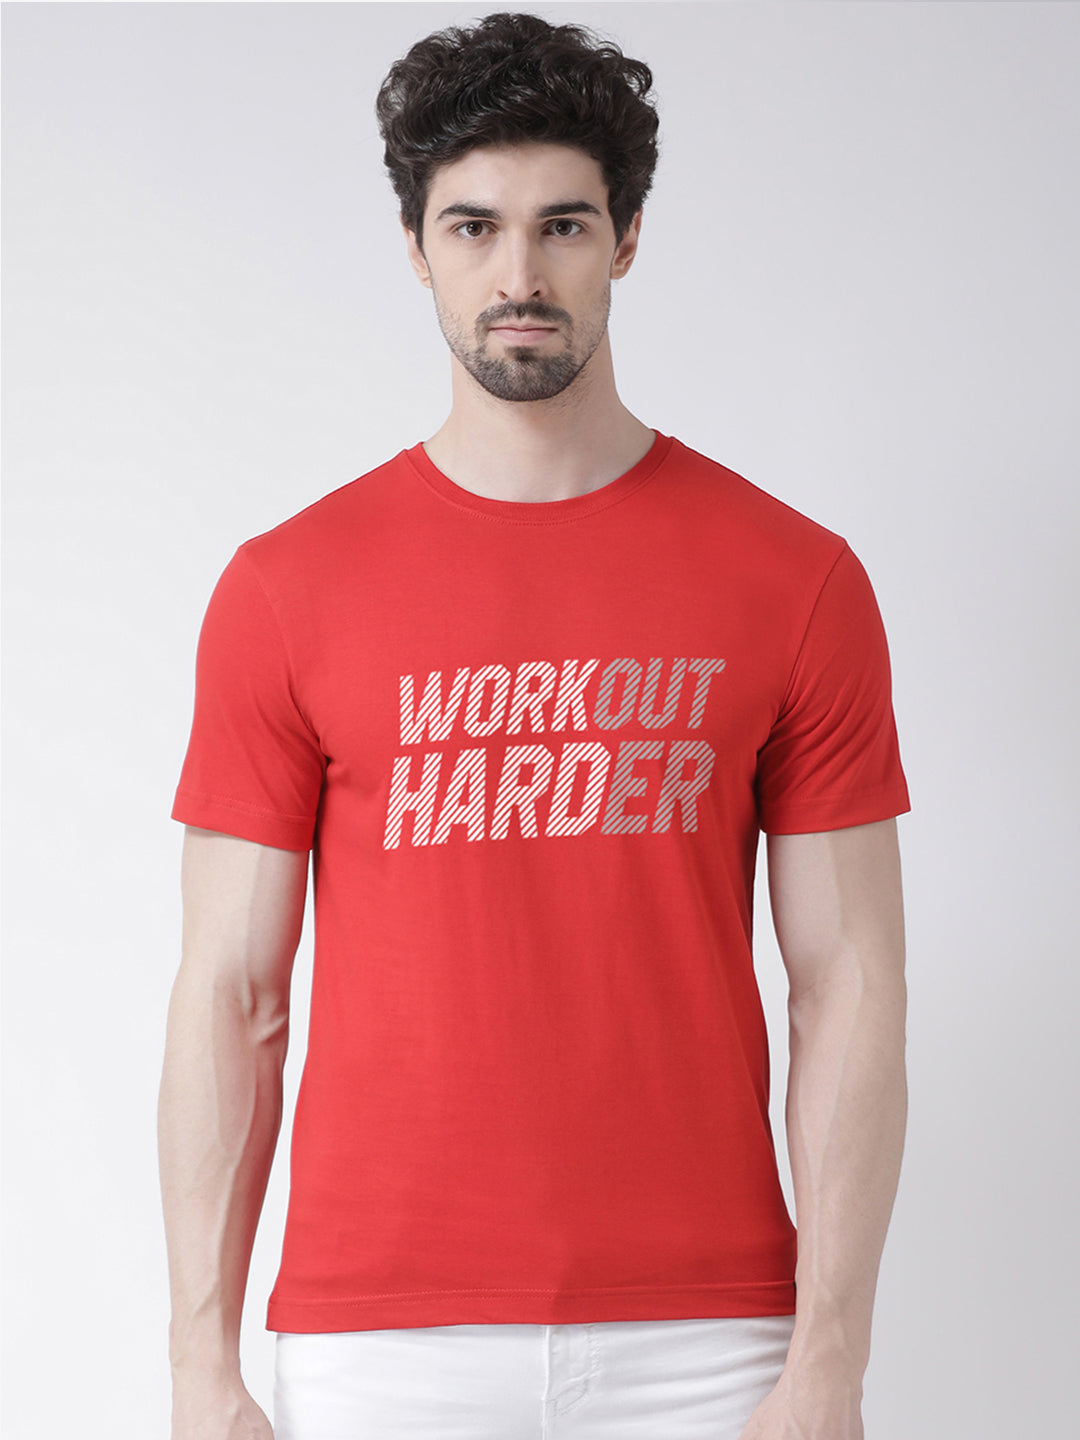 Workout harder Printed Clearence Round Neck T-shirt - Friskers